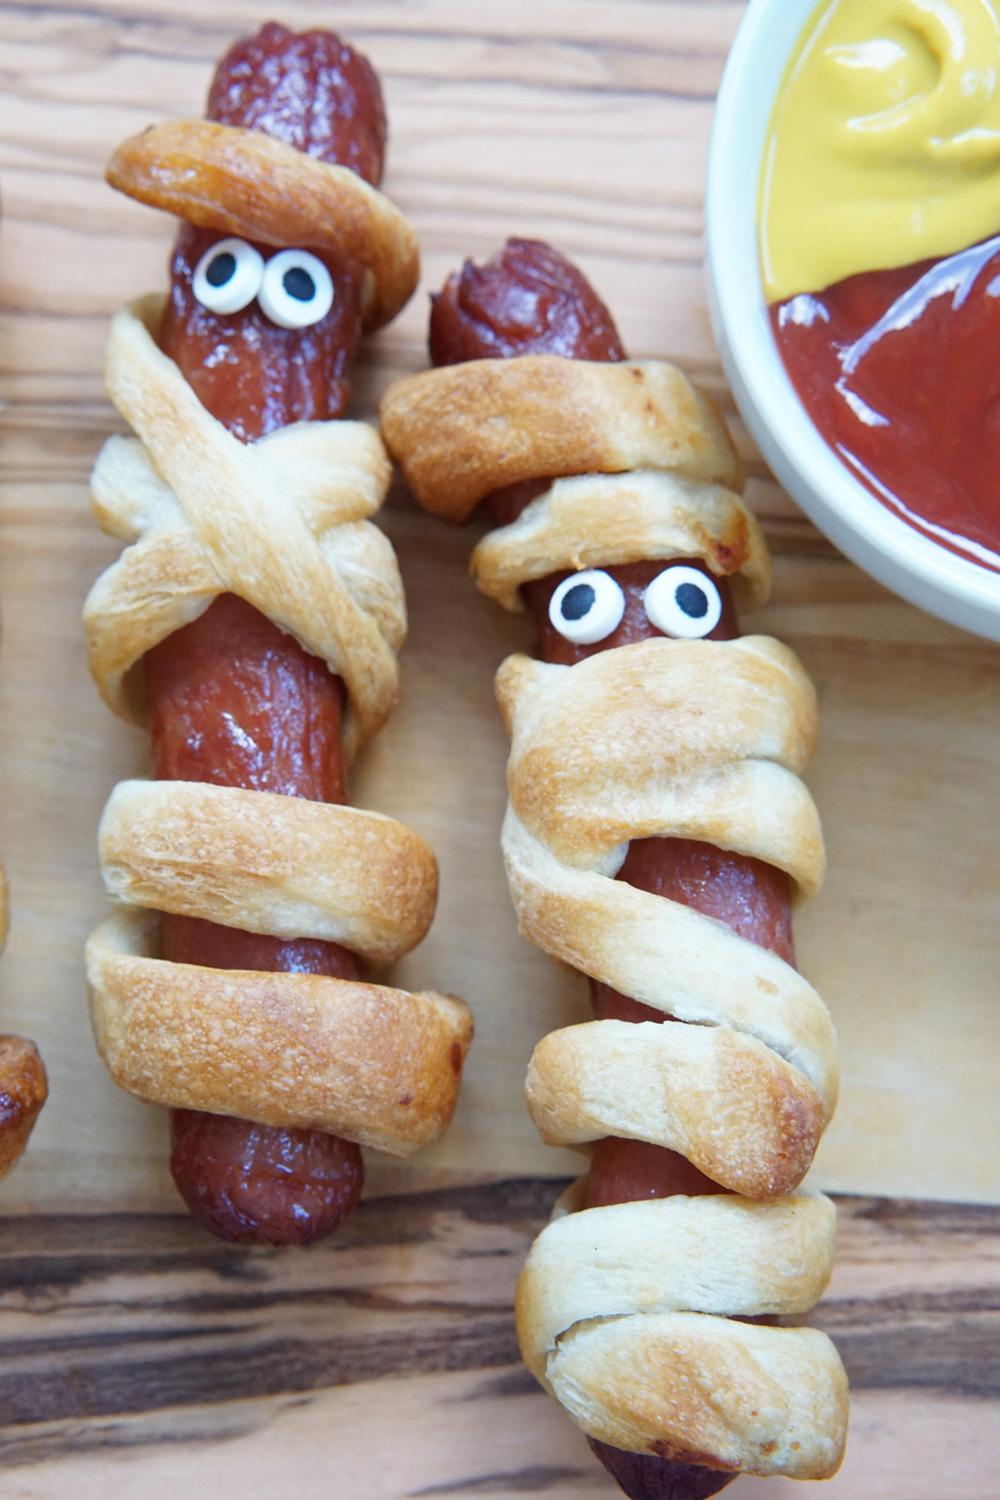 Mummy dogs with dipping sauce